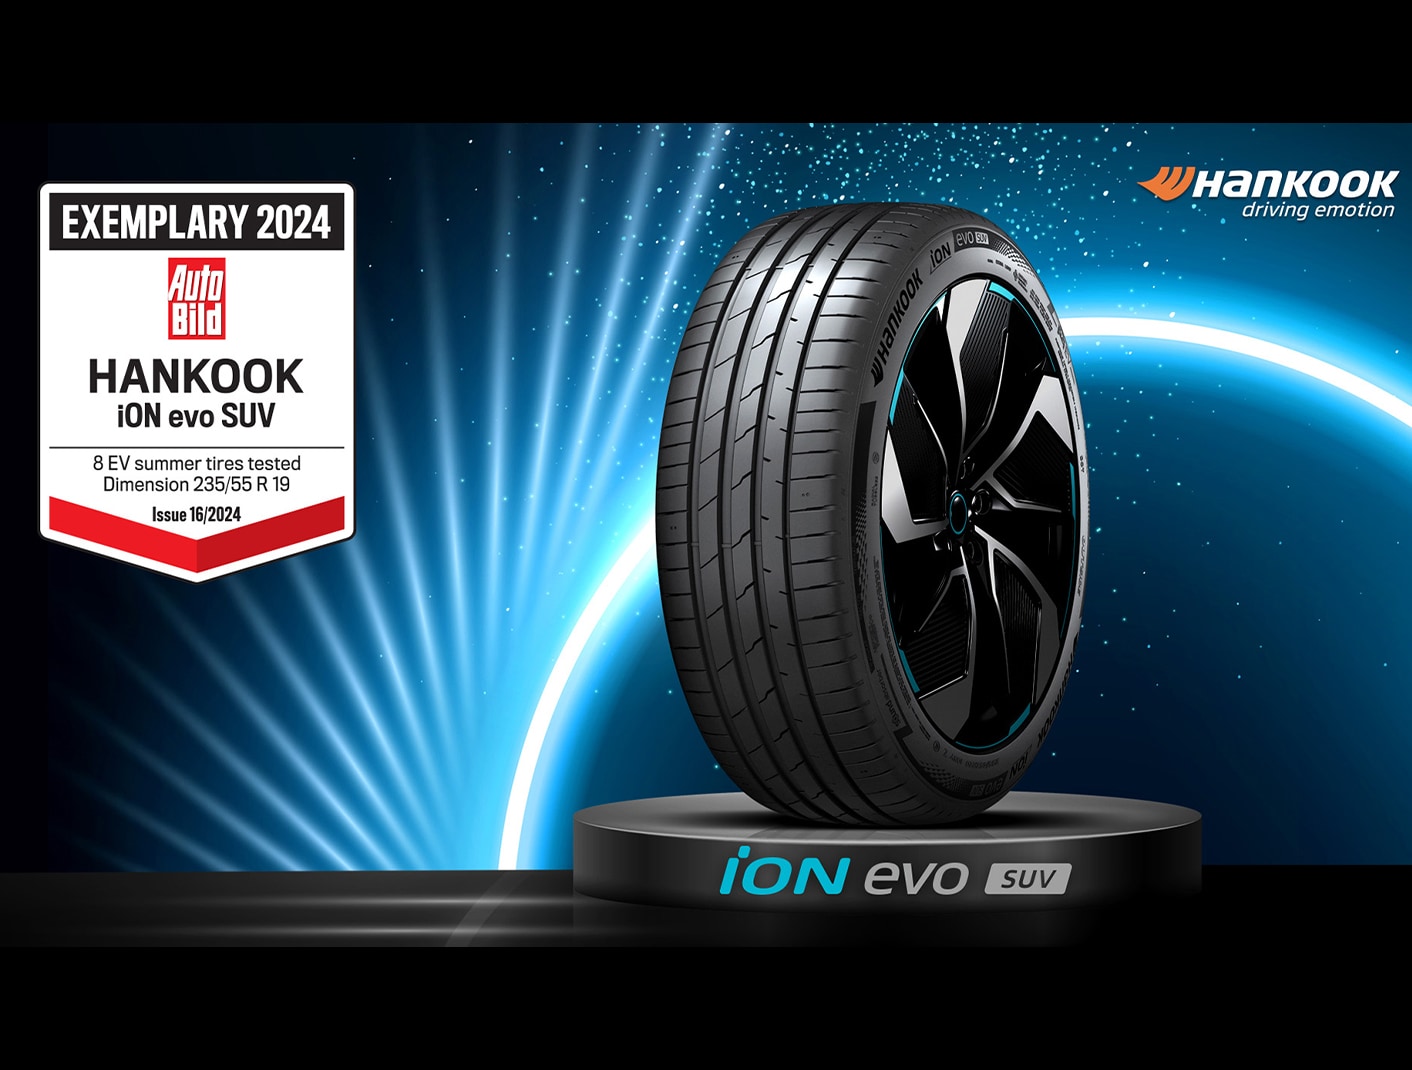 Hankook Tire's exclusive EV tire, "iON evo SUV," earns the highest “Exemplary” rating by Germany’s most prestigious automotive magazine